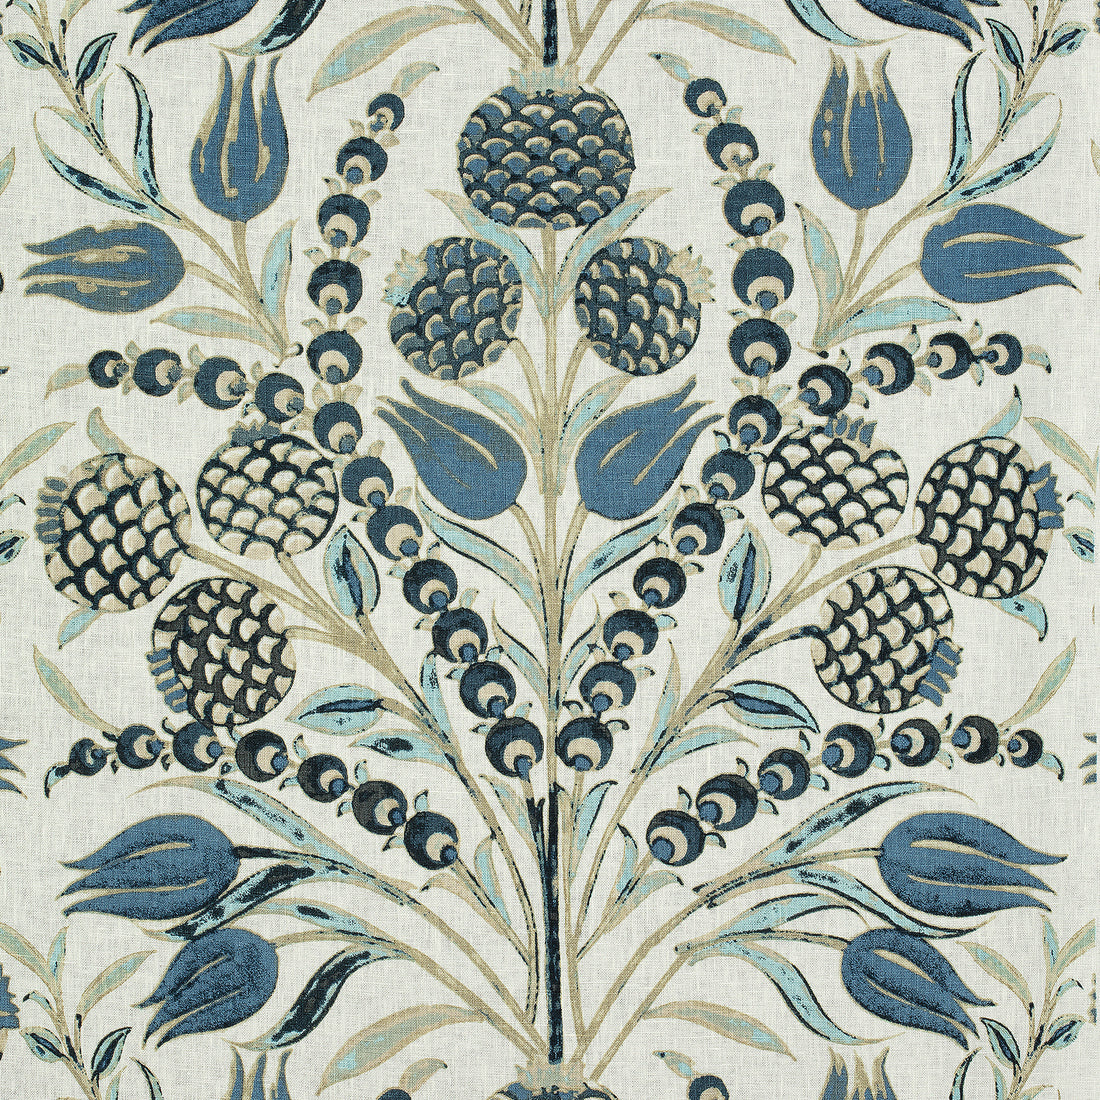 Corneila fabric in aqua and blue color - pattern number F972602 - by Thibaut in the Chestnut Hill collection